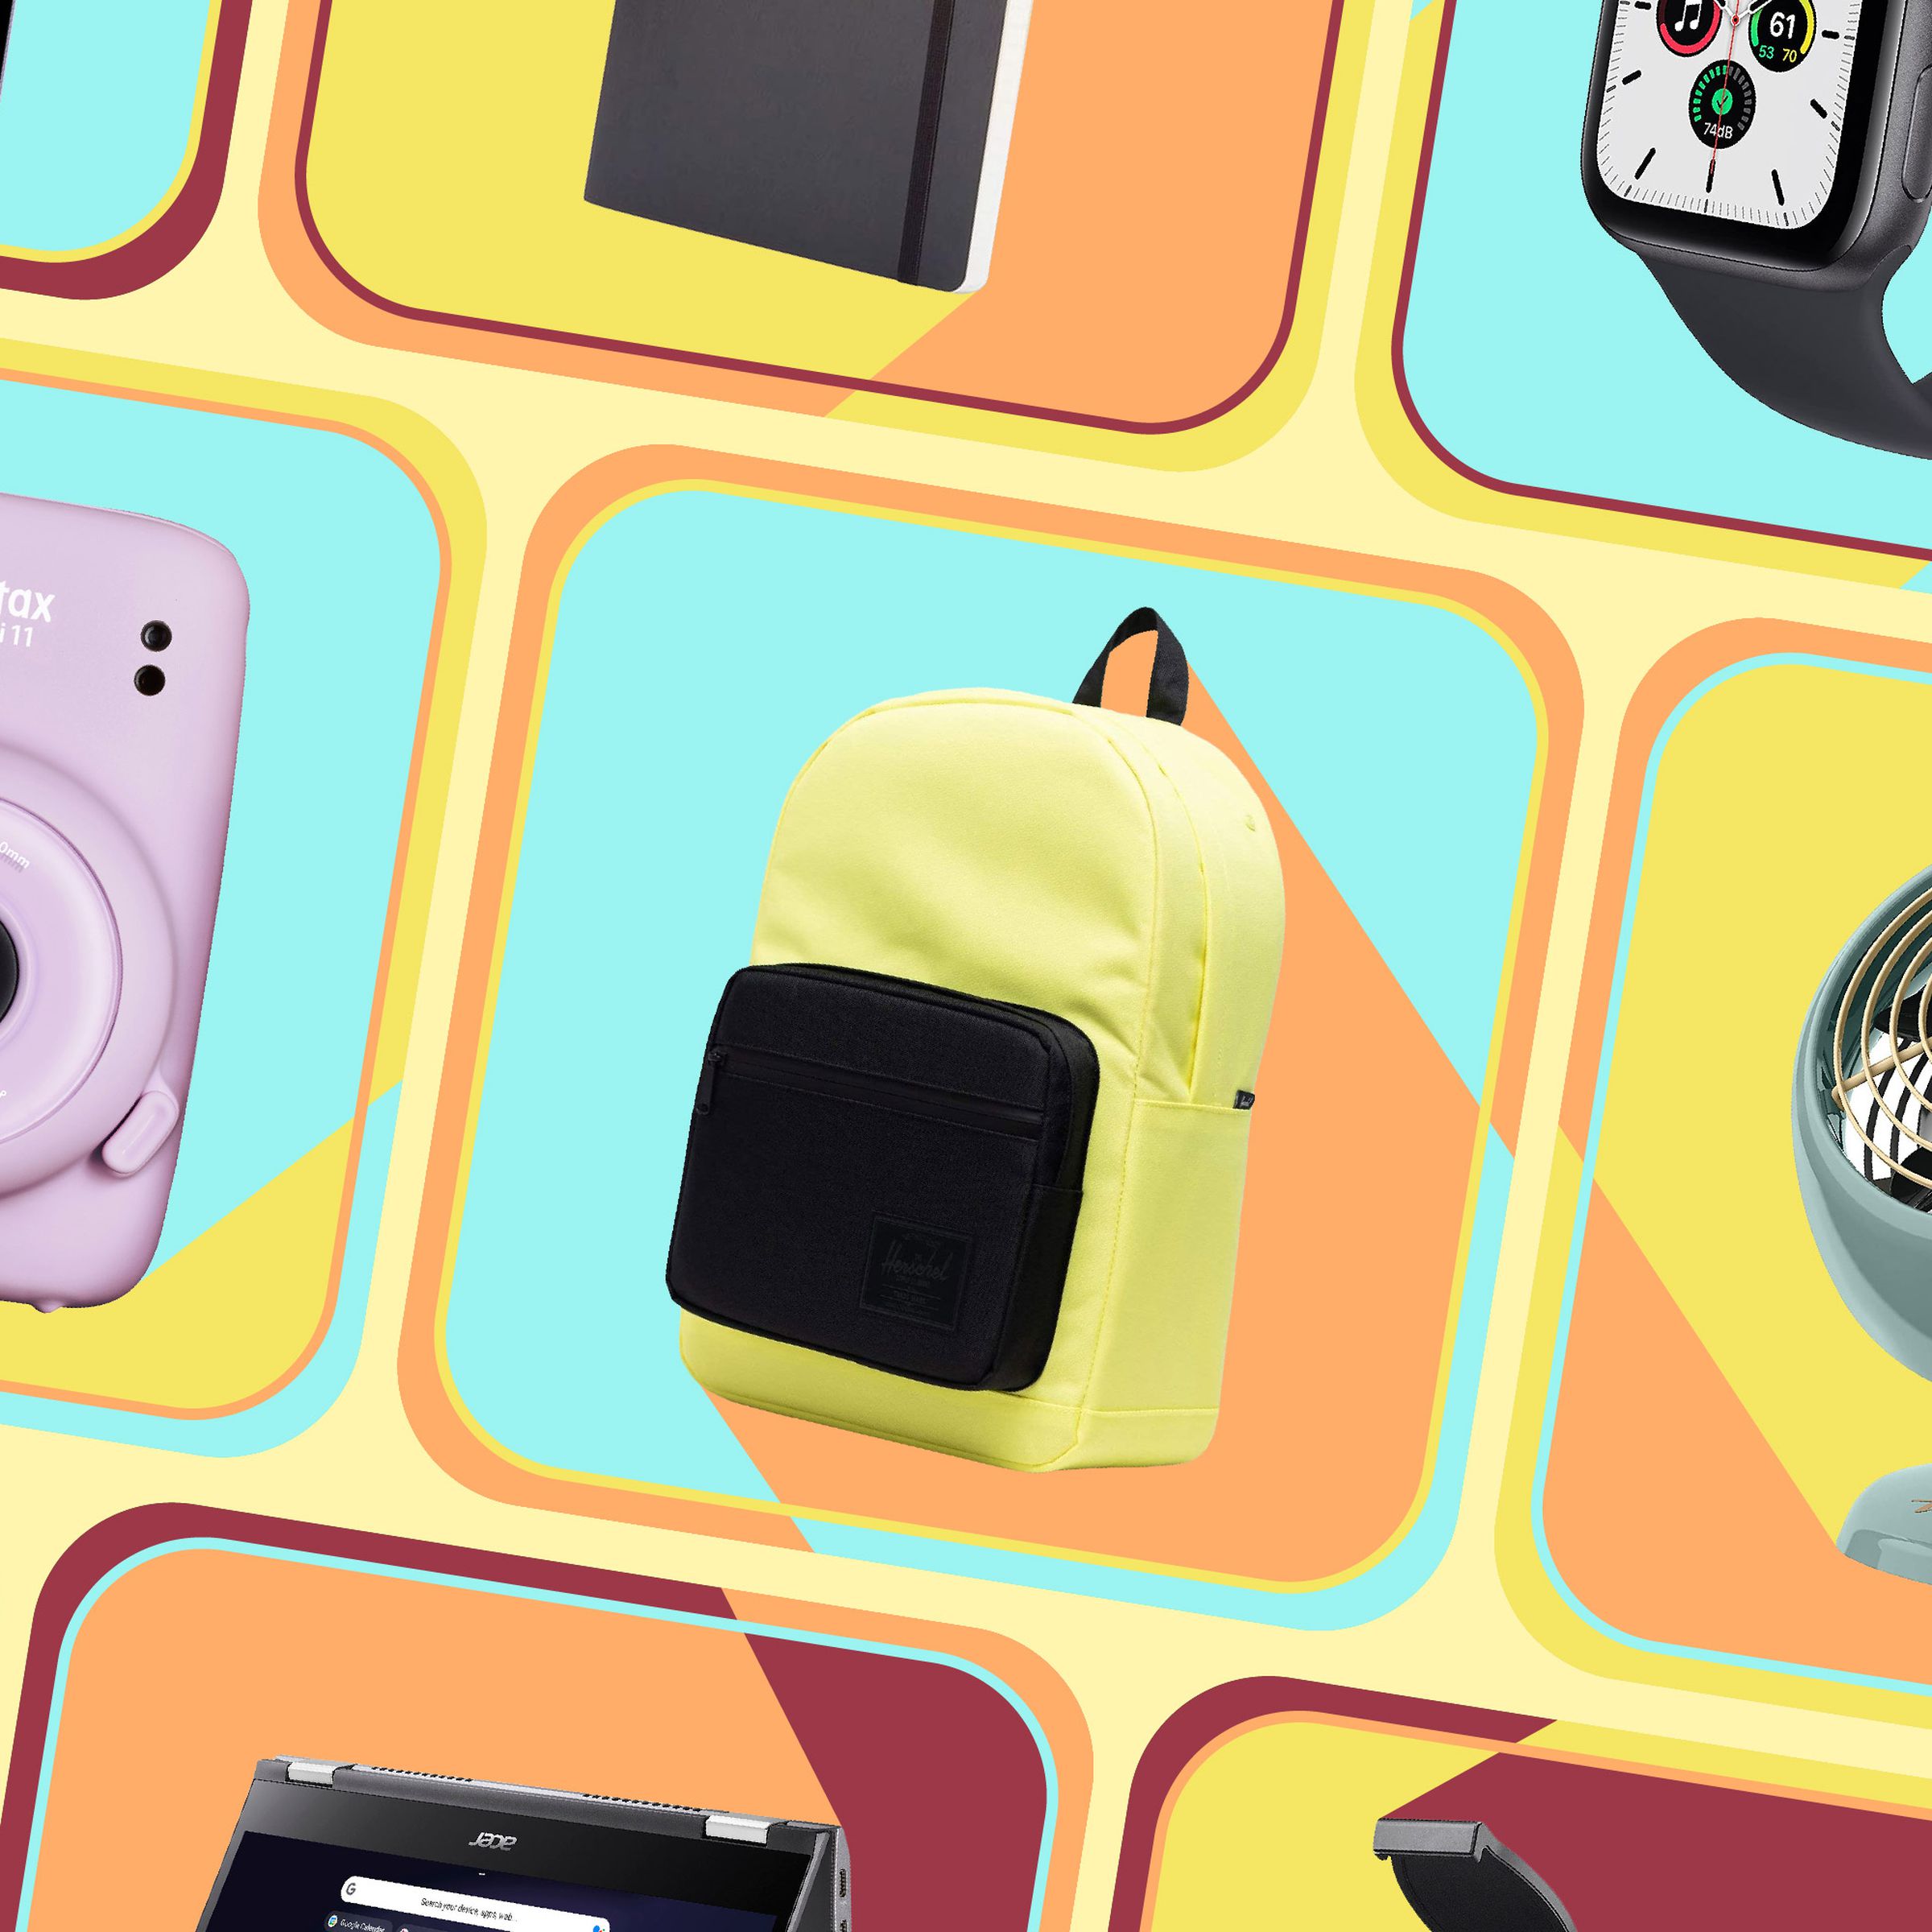 All the best backpacks, laptops, tablets, and wearables for the new school year.